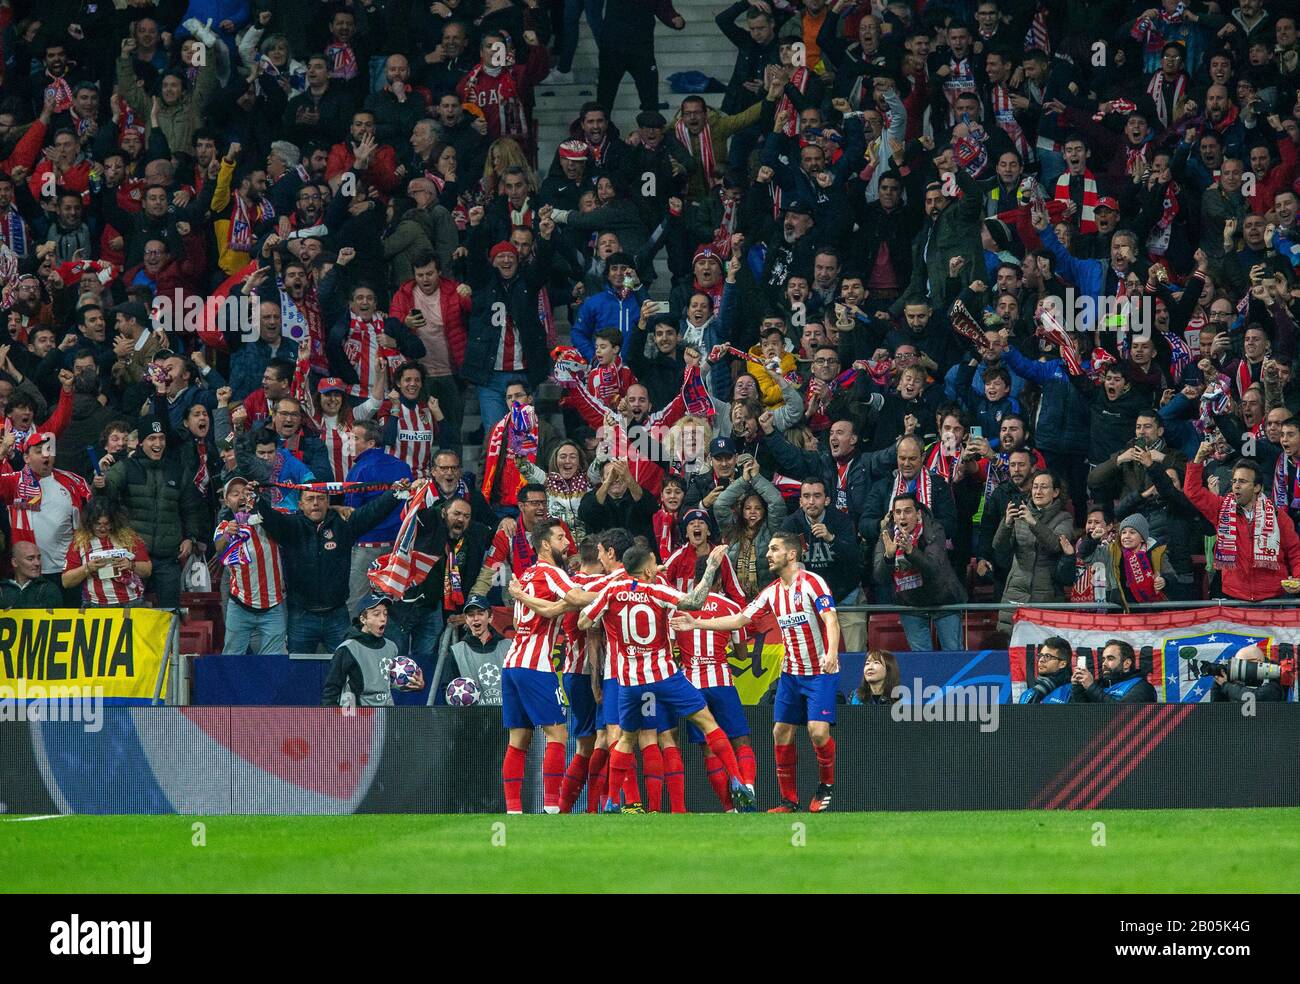 Atletico de Madrid's Saul Ñiguez  celebrates a goal with his teammates during the UEFA Champions League match, round of 16 first leg between Atletico de  Madrid and Liverpool FC at Wanda Metropolitano Stadium in Madrid.(Final score; Atletico de Madrid 1:0 Liverpool FC) Stock Photo